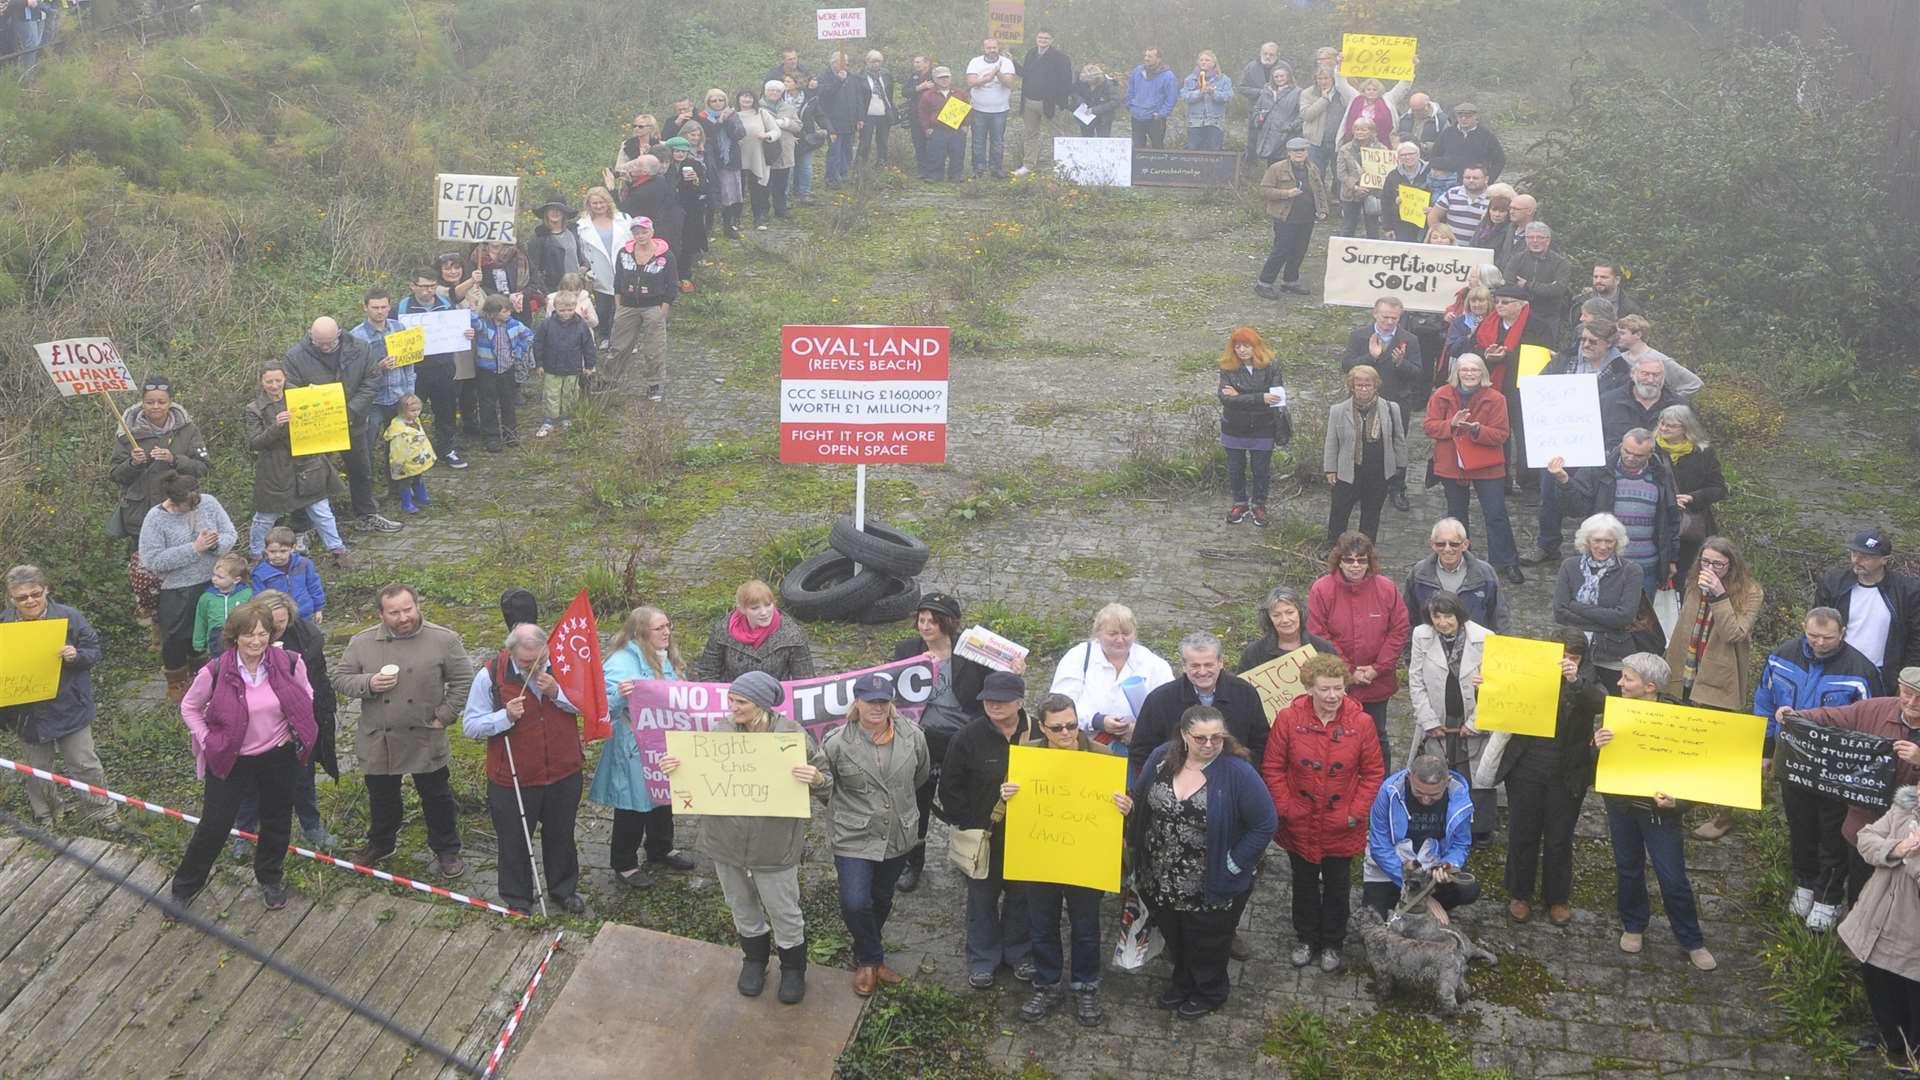 Protesters at the Oval Chalet site in Whitstable